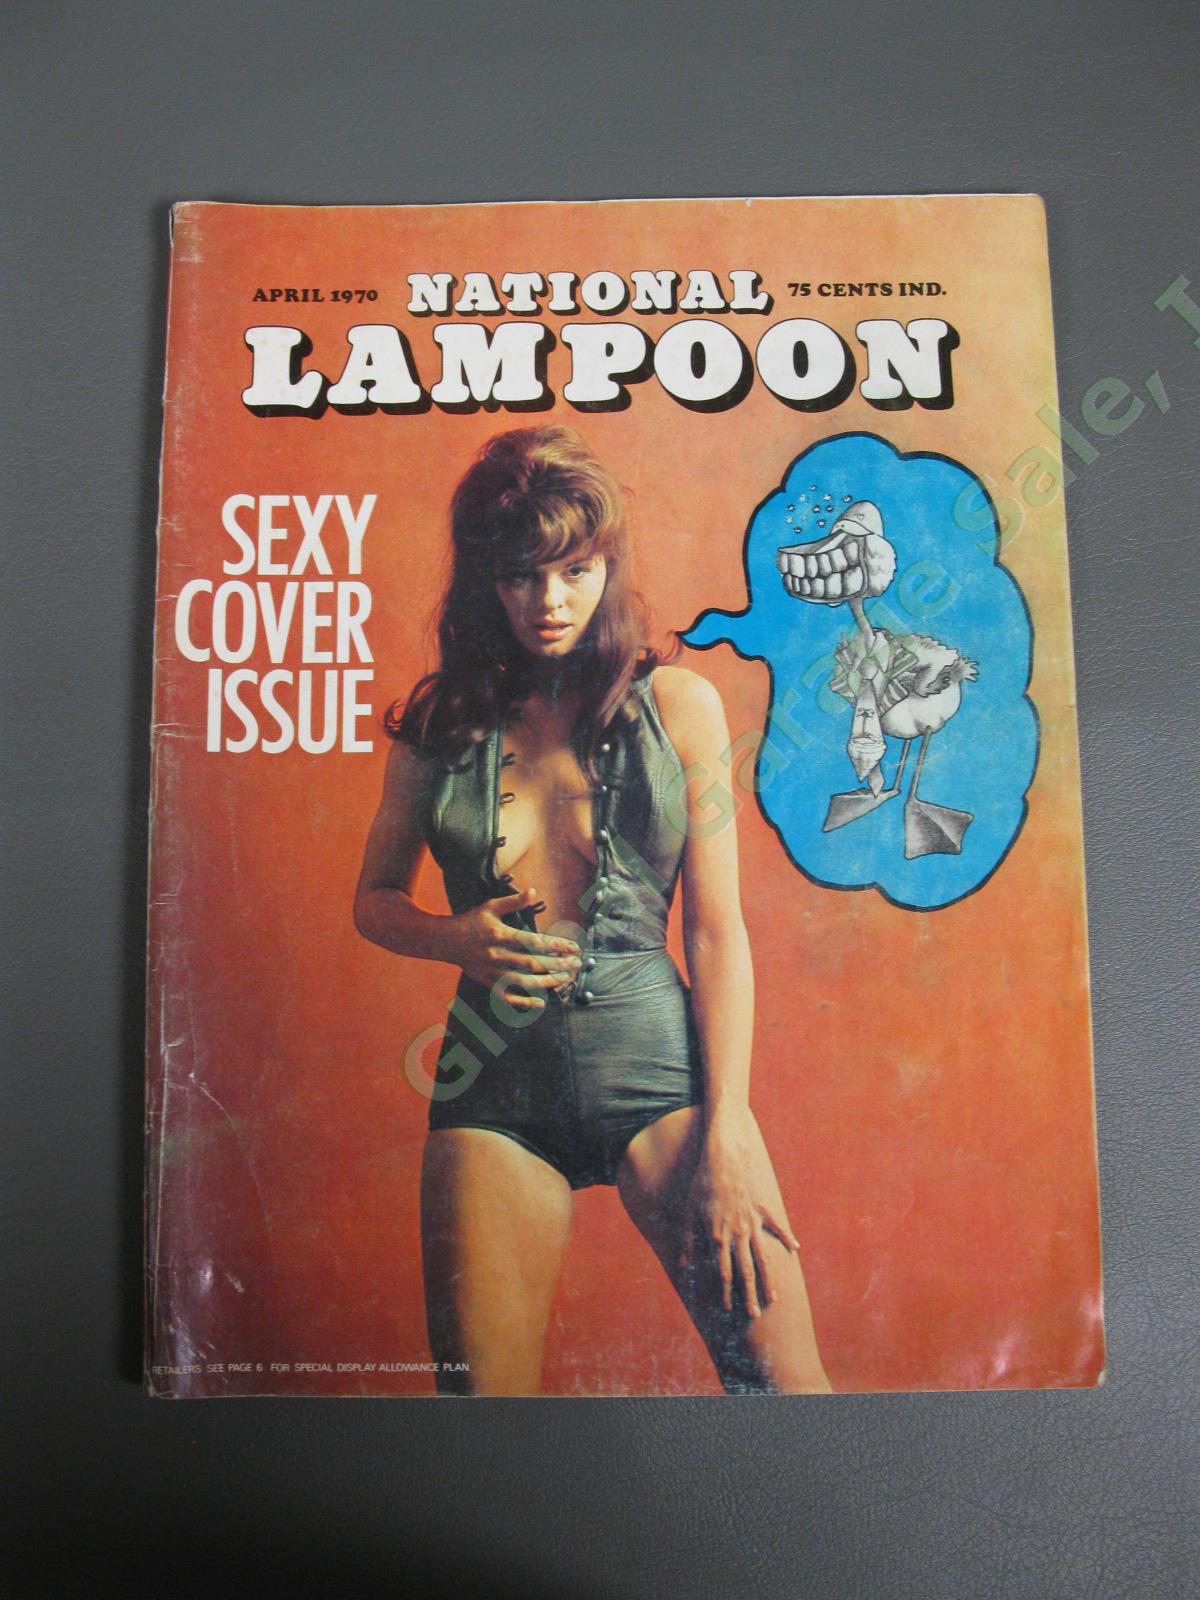 COMPLETE 9 Vintage 1970 National Lampoon Humor Magazine April #1 FIRST ISSUE Set 1